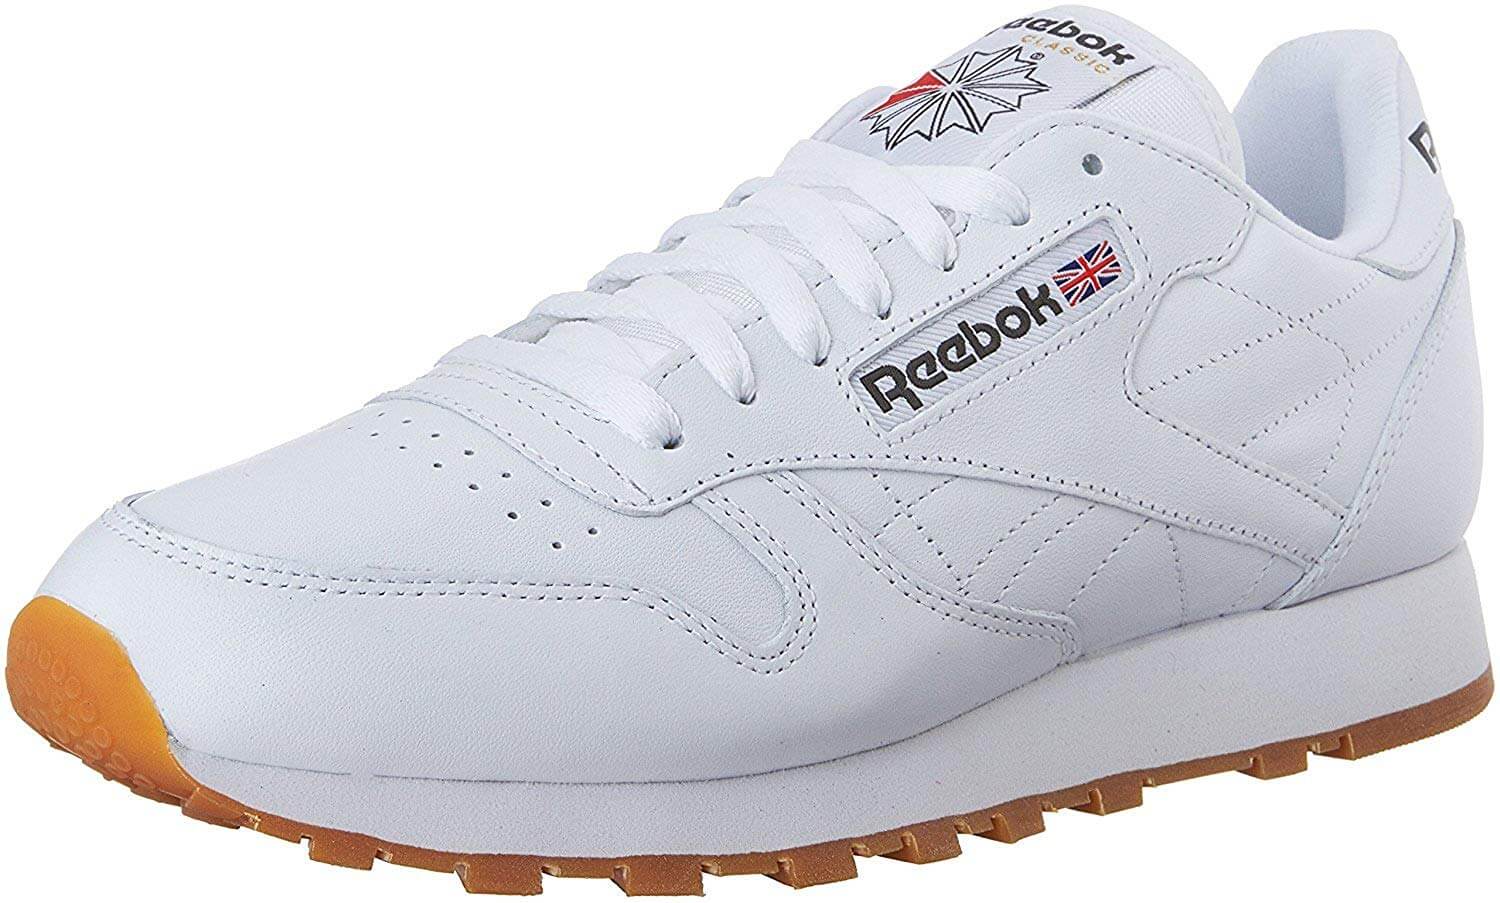 Are Reebok Real Leather?